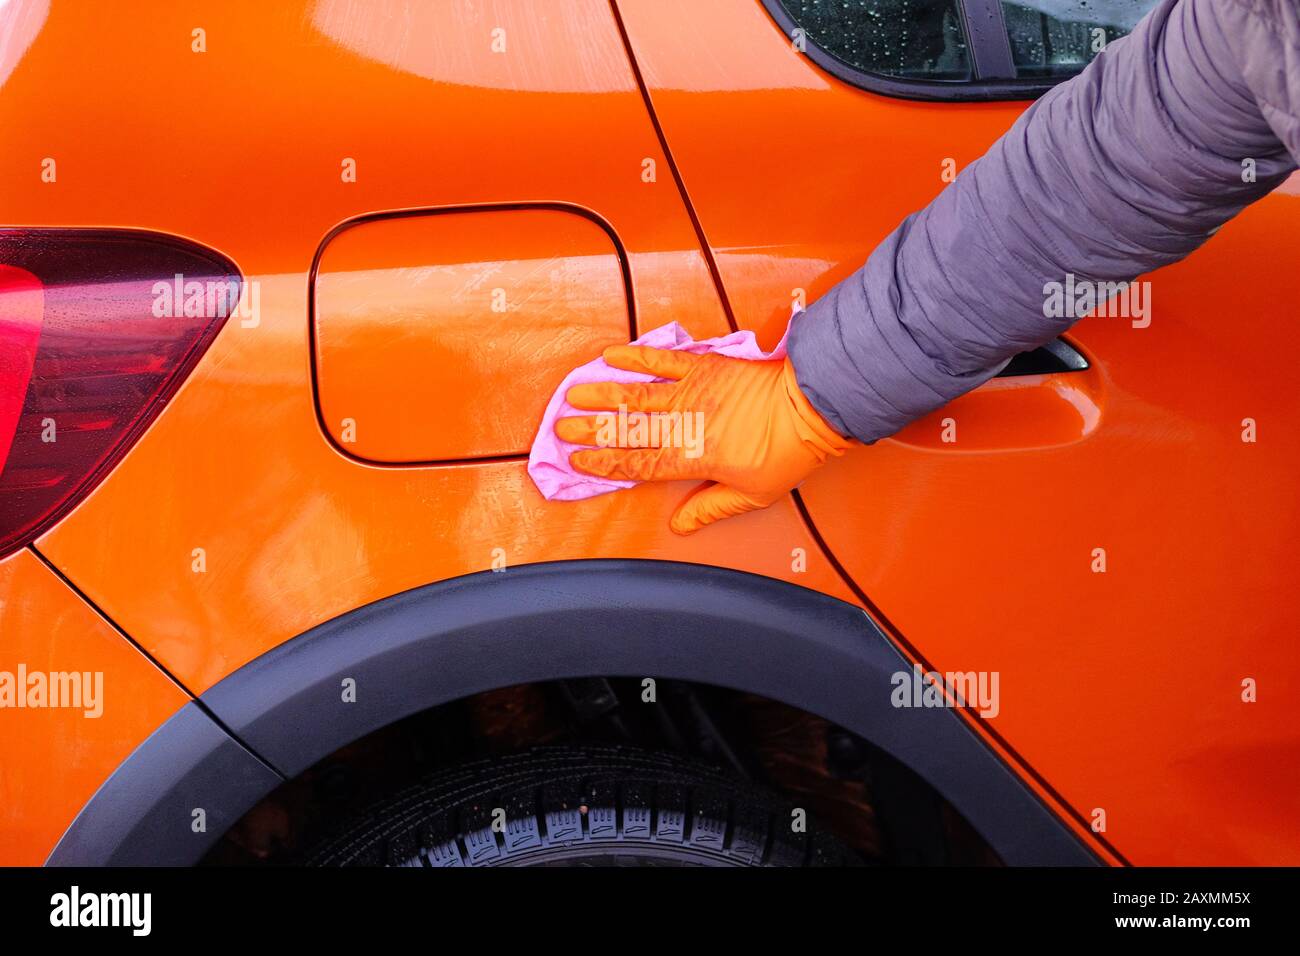 Man after cleaning wipes his orange car with a pink rag  at car wash. Male hand and car body closeup. Stock Photo